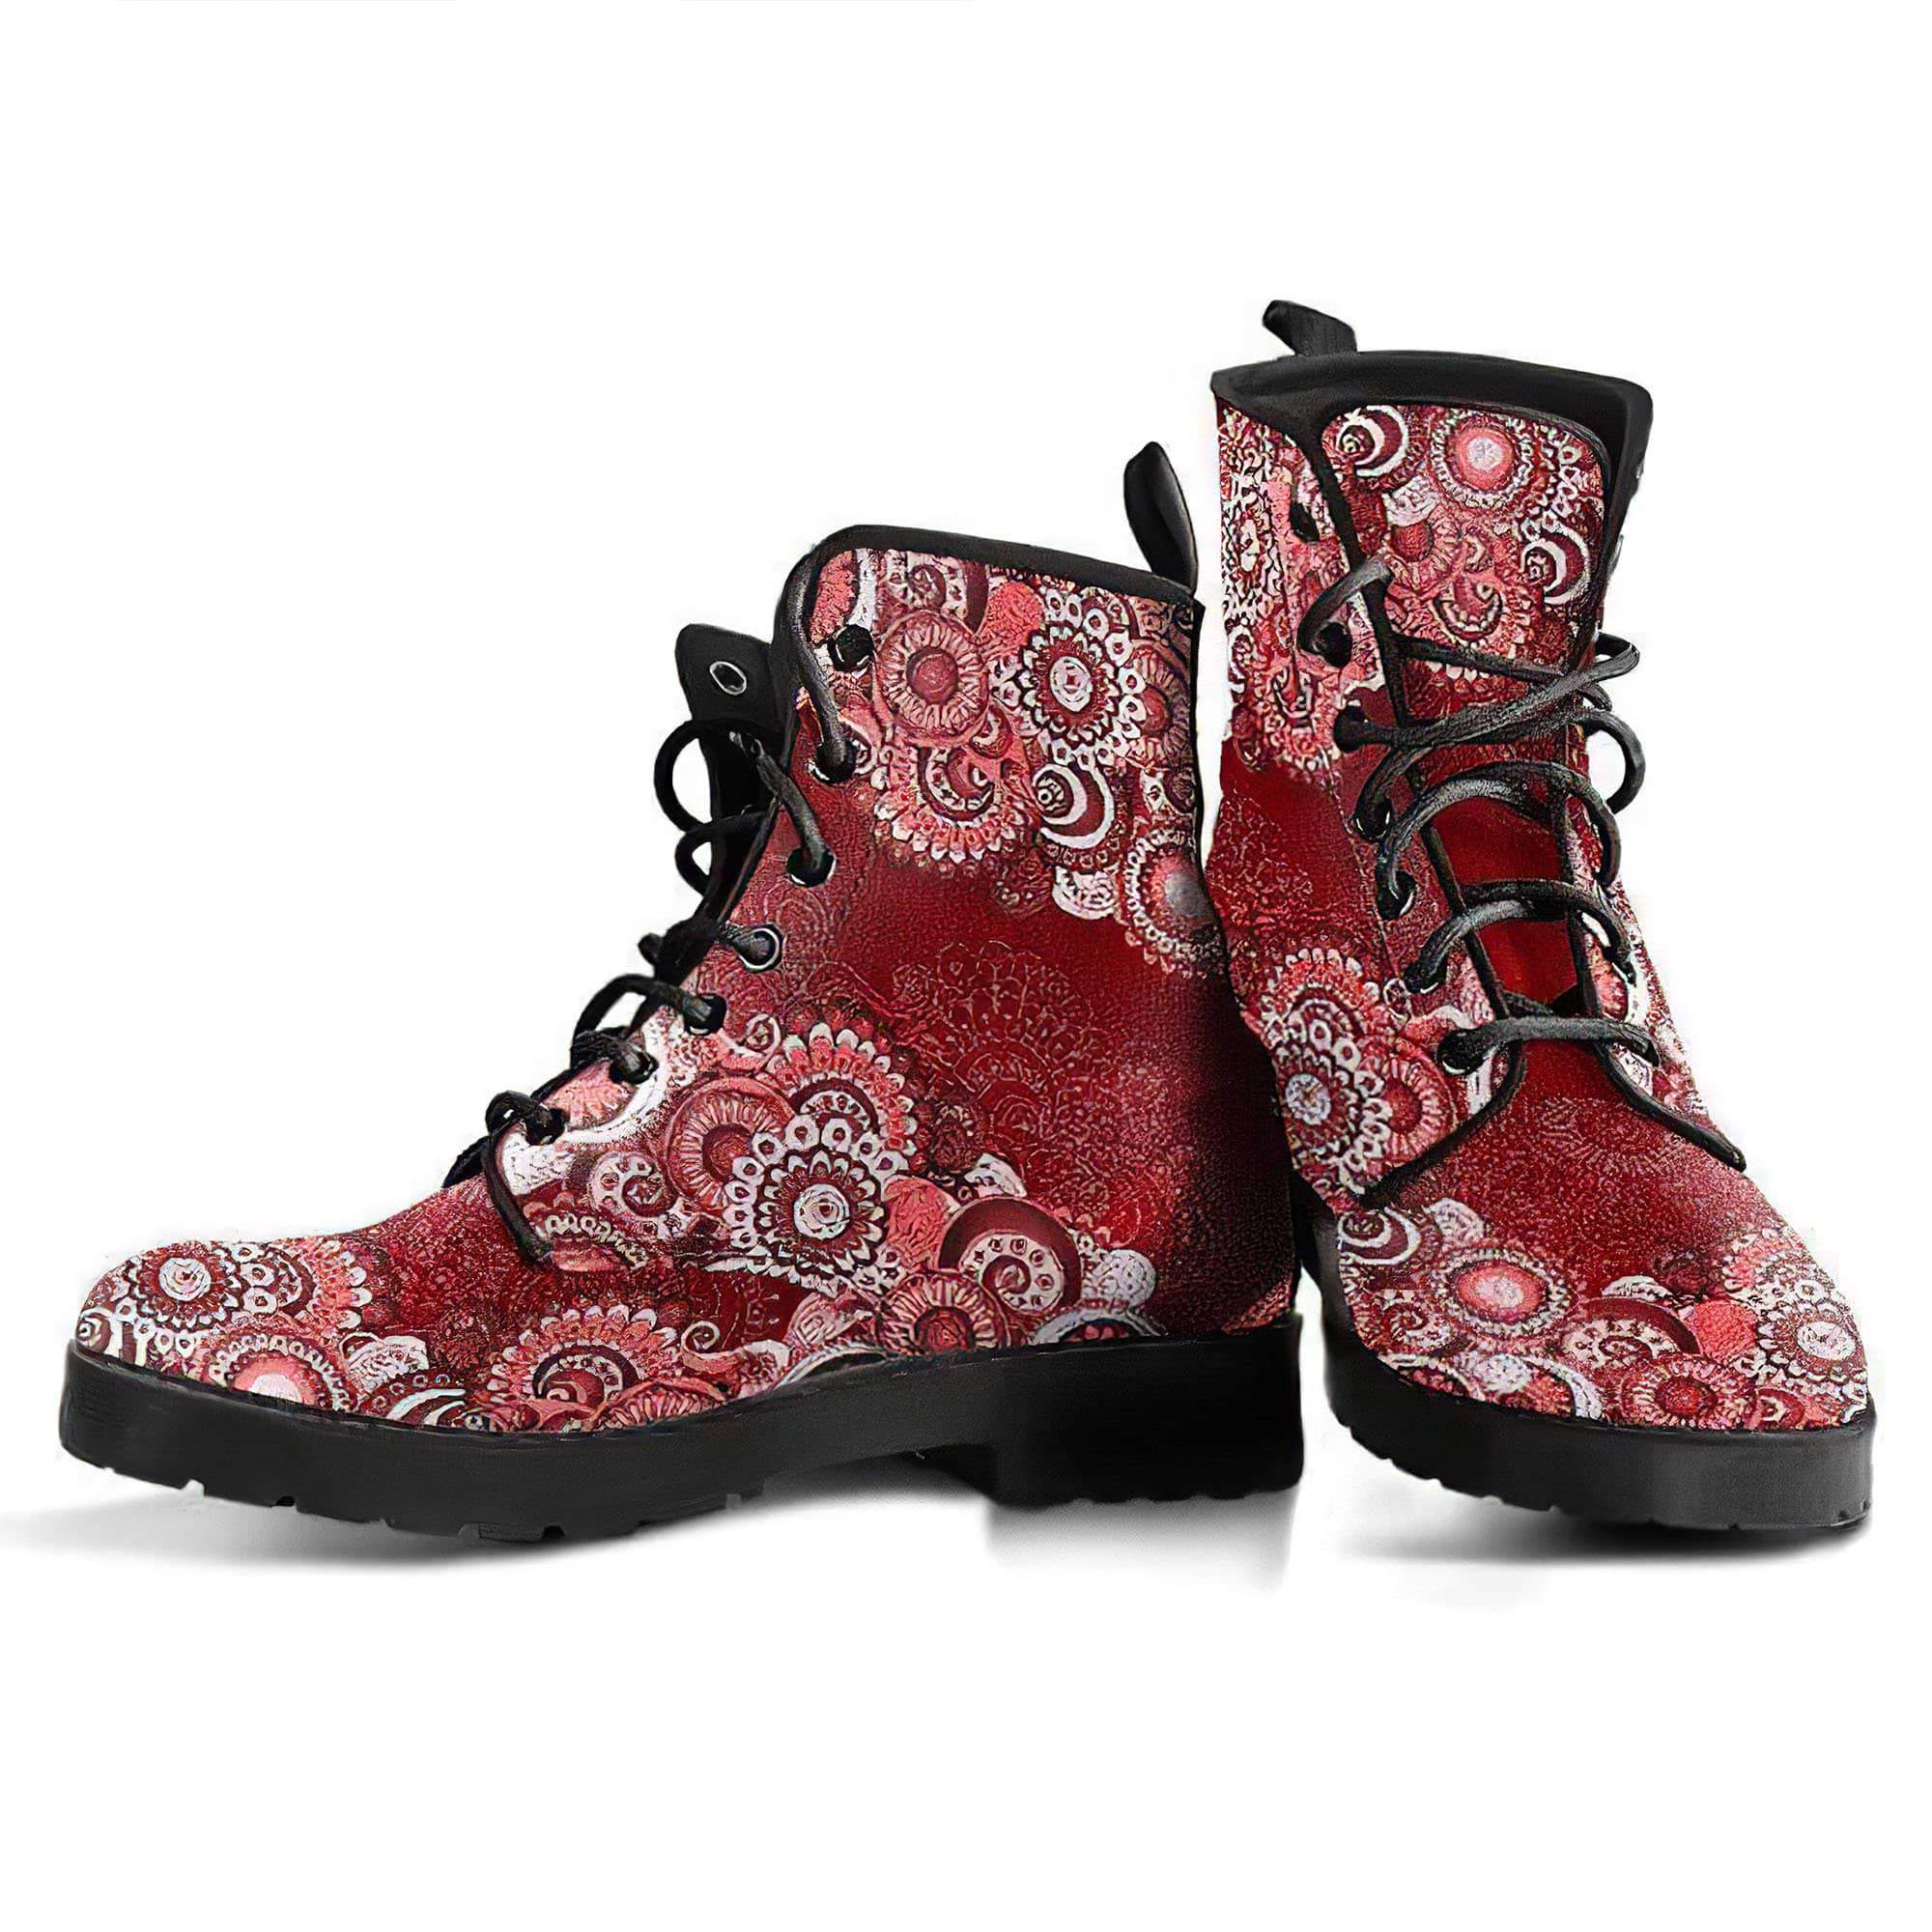 red-mandalas-handcrafted-boots-women-s-leather-boots-12051943653437.jpg